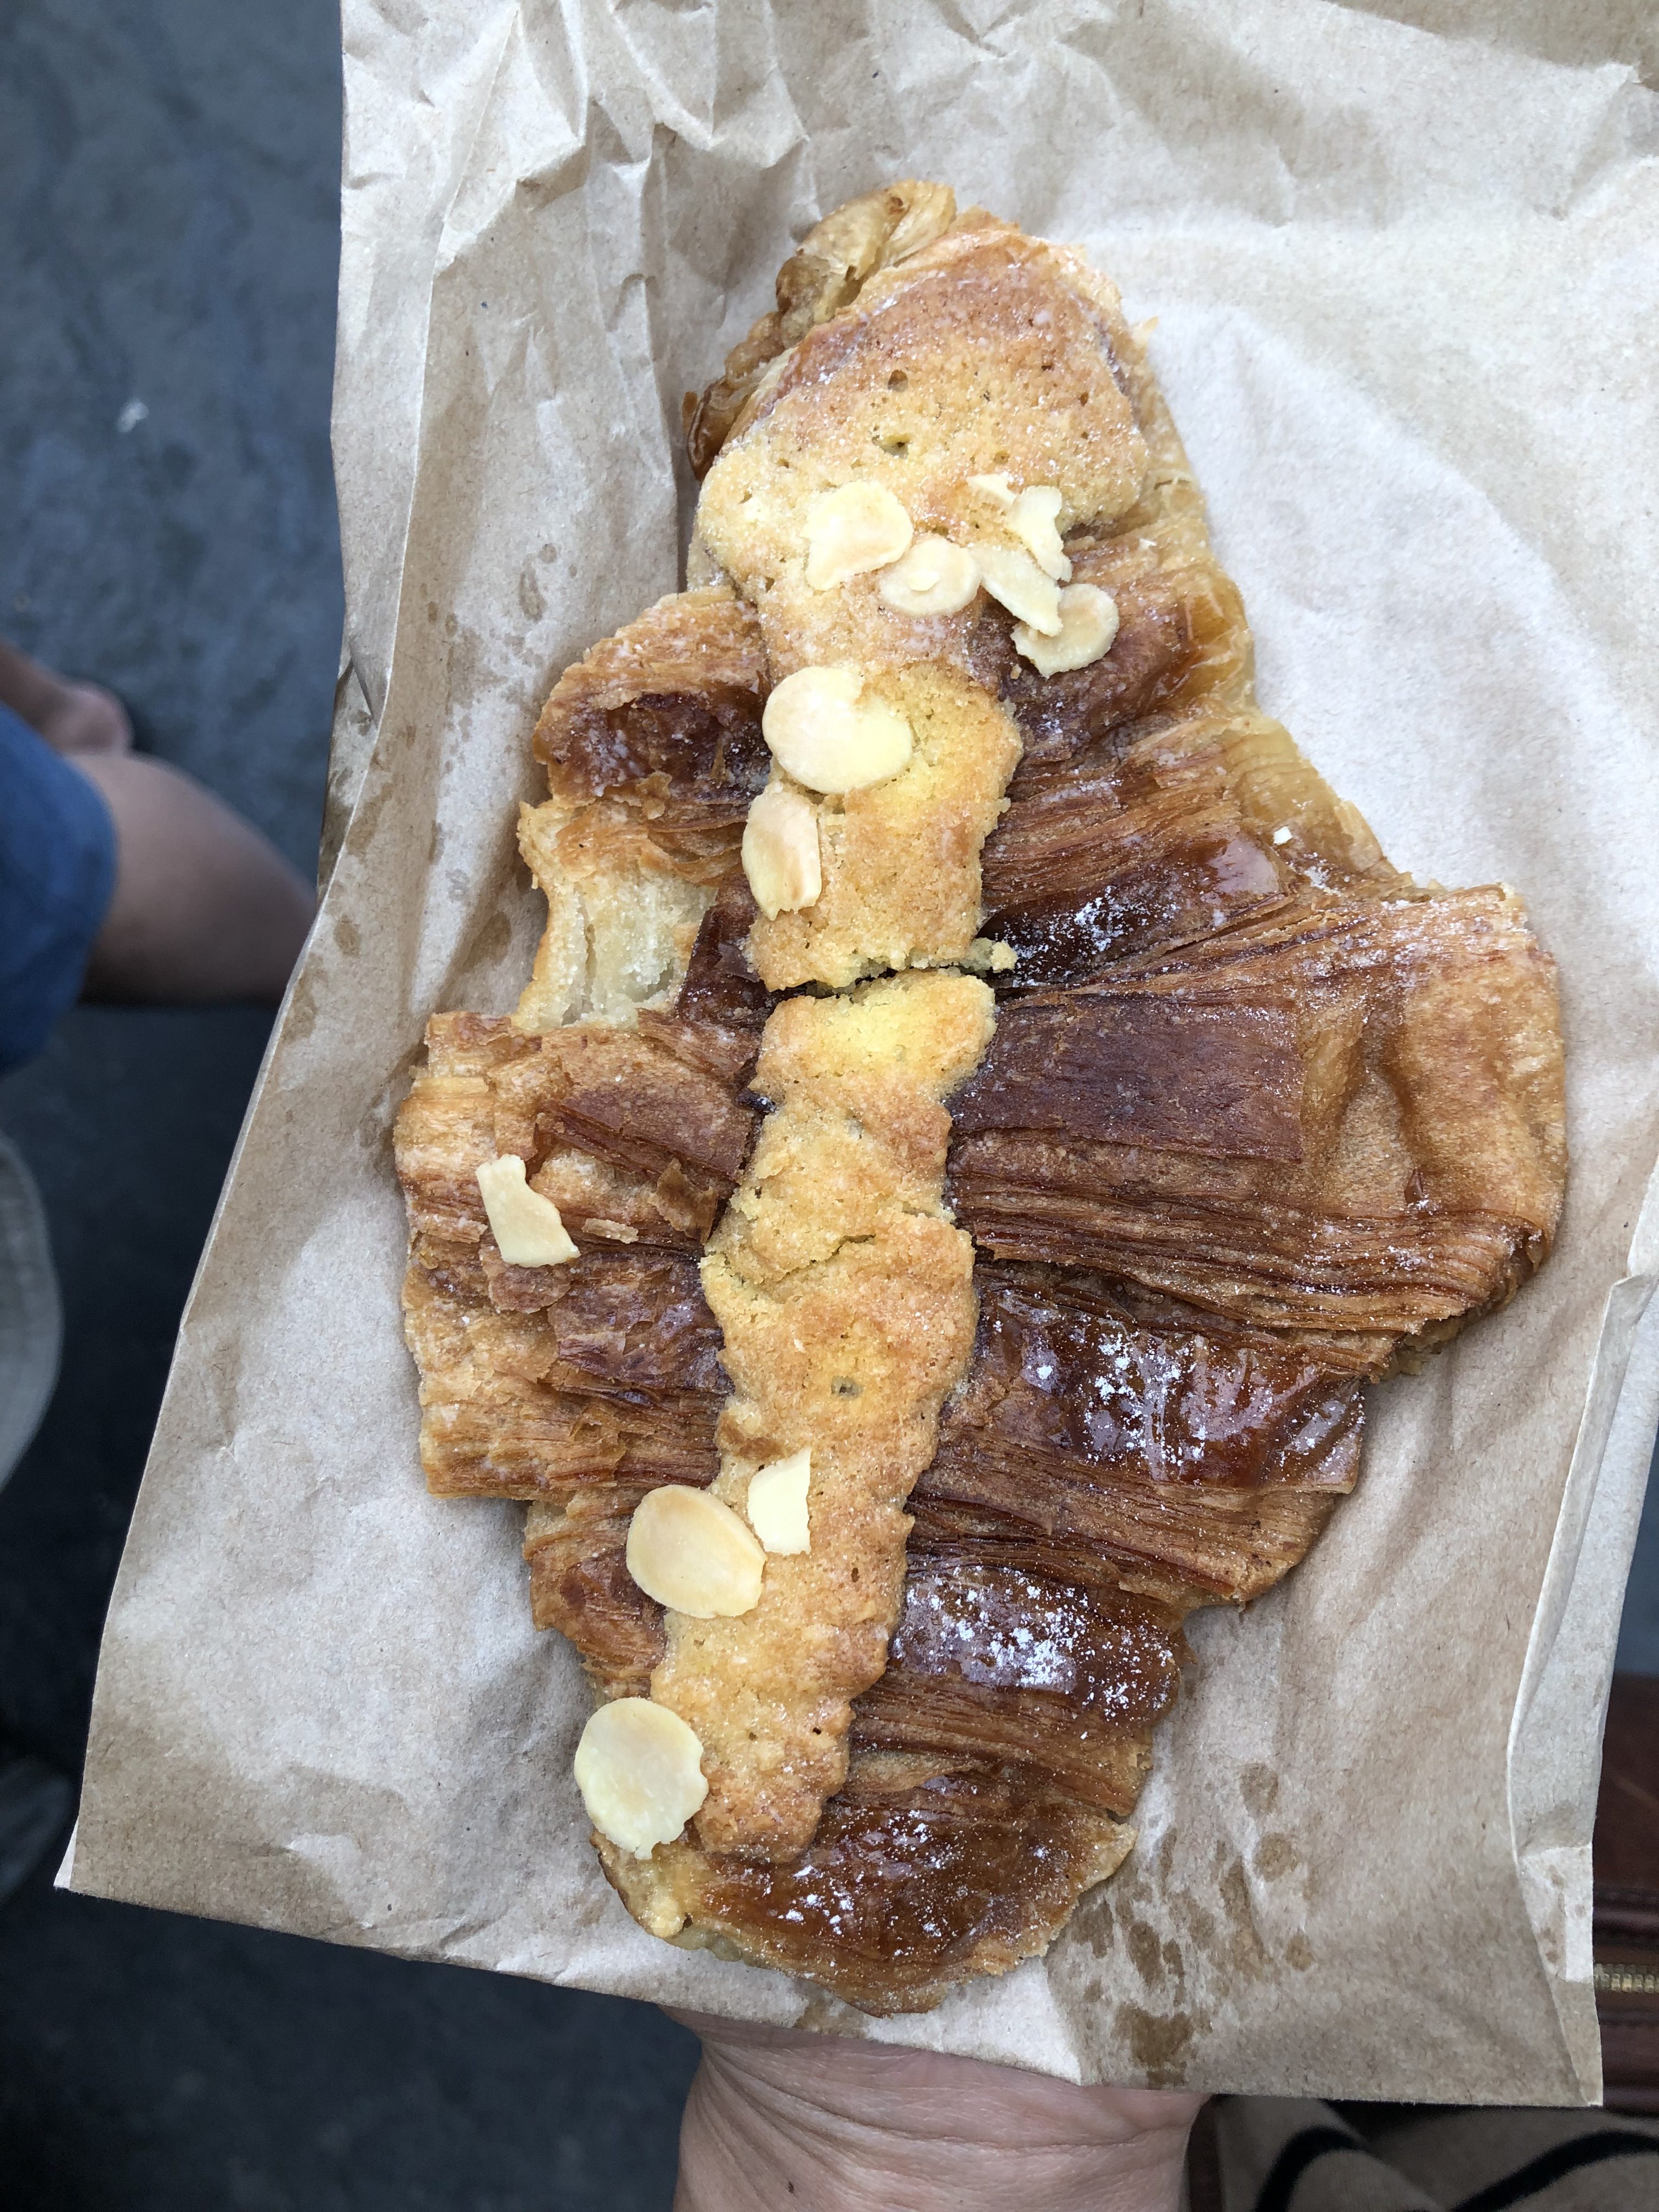 A buttery almond croissant from Boulangerie Utopie in Paris.